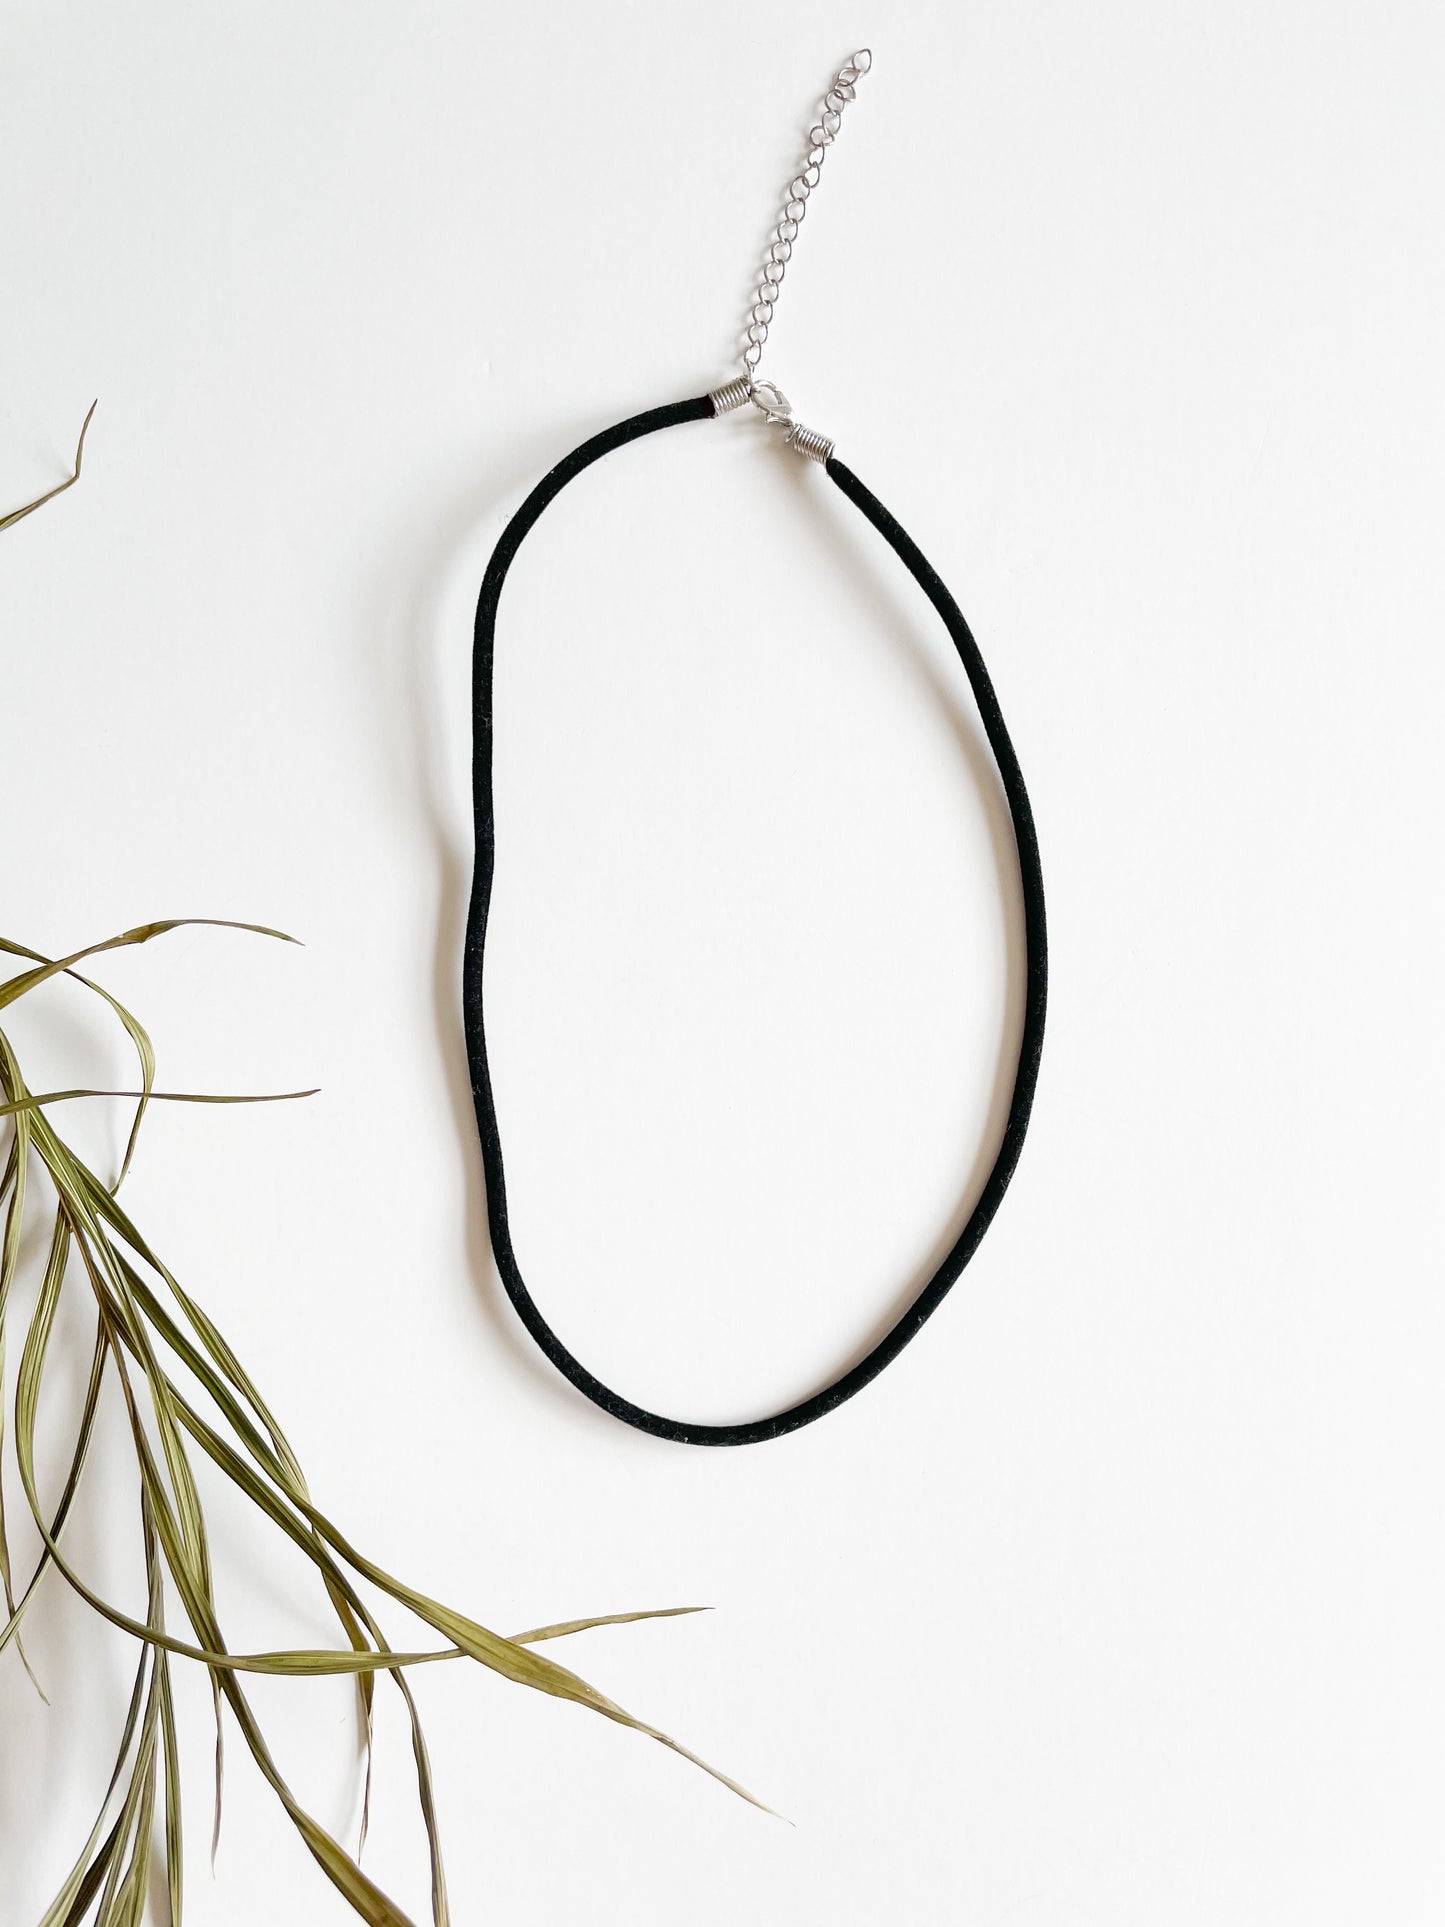 Cord Necklaces - Black and Brown